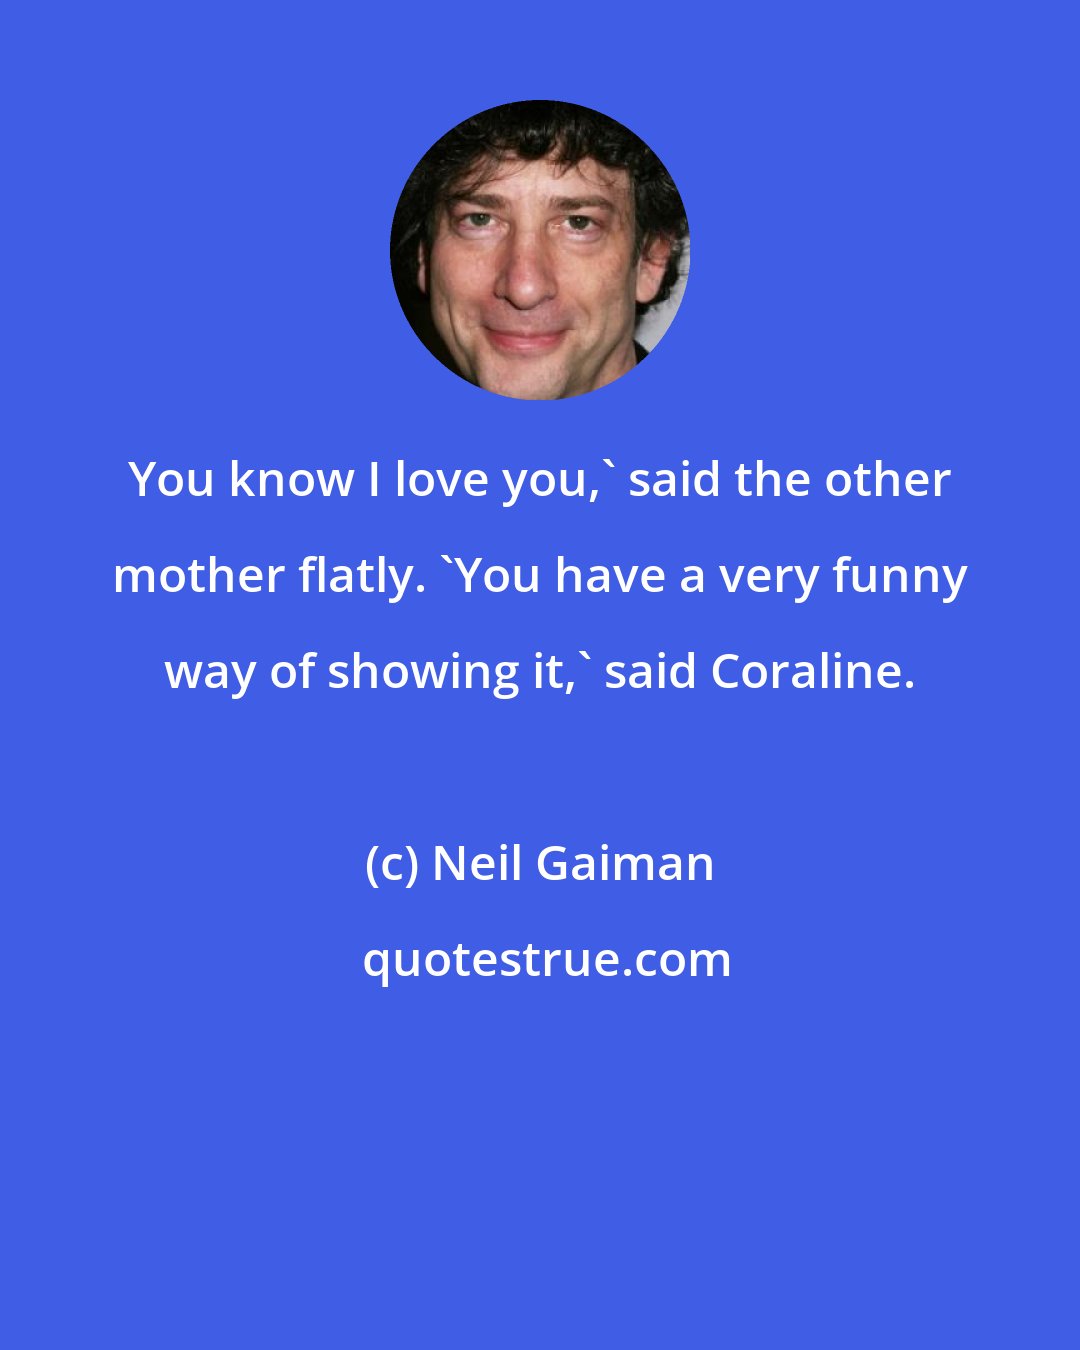 Neil Gaiman: You know I love you,' said the other mother flatly. 'You have a very funny way of showing it,' said Coraline.